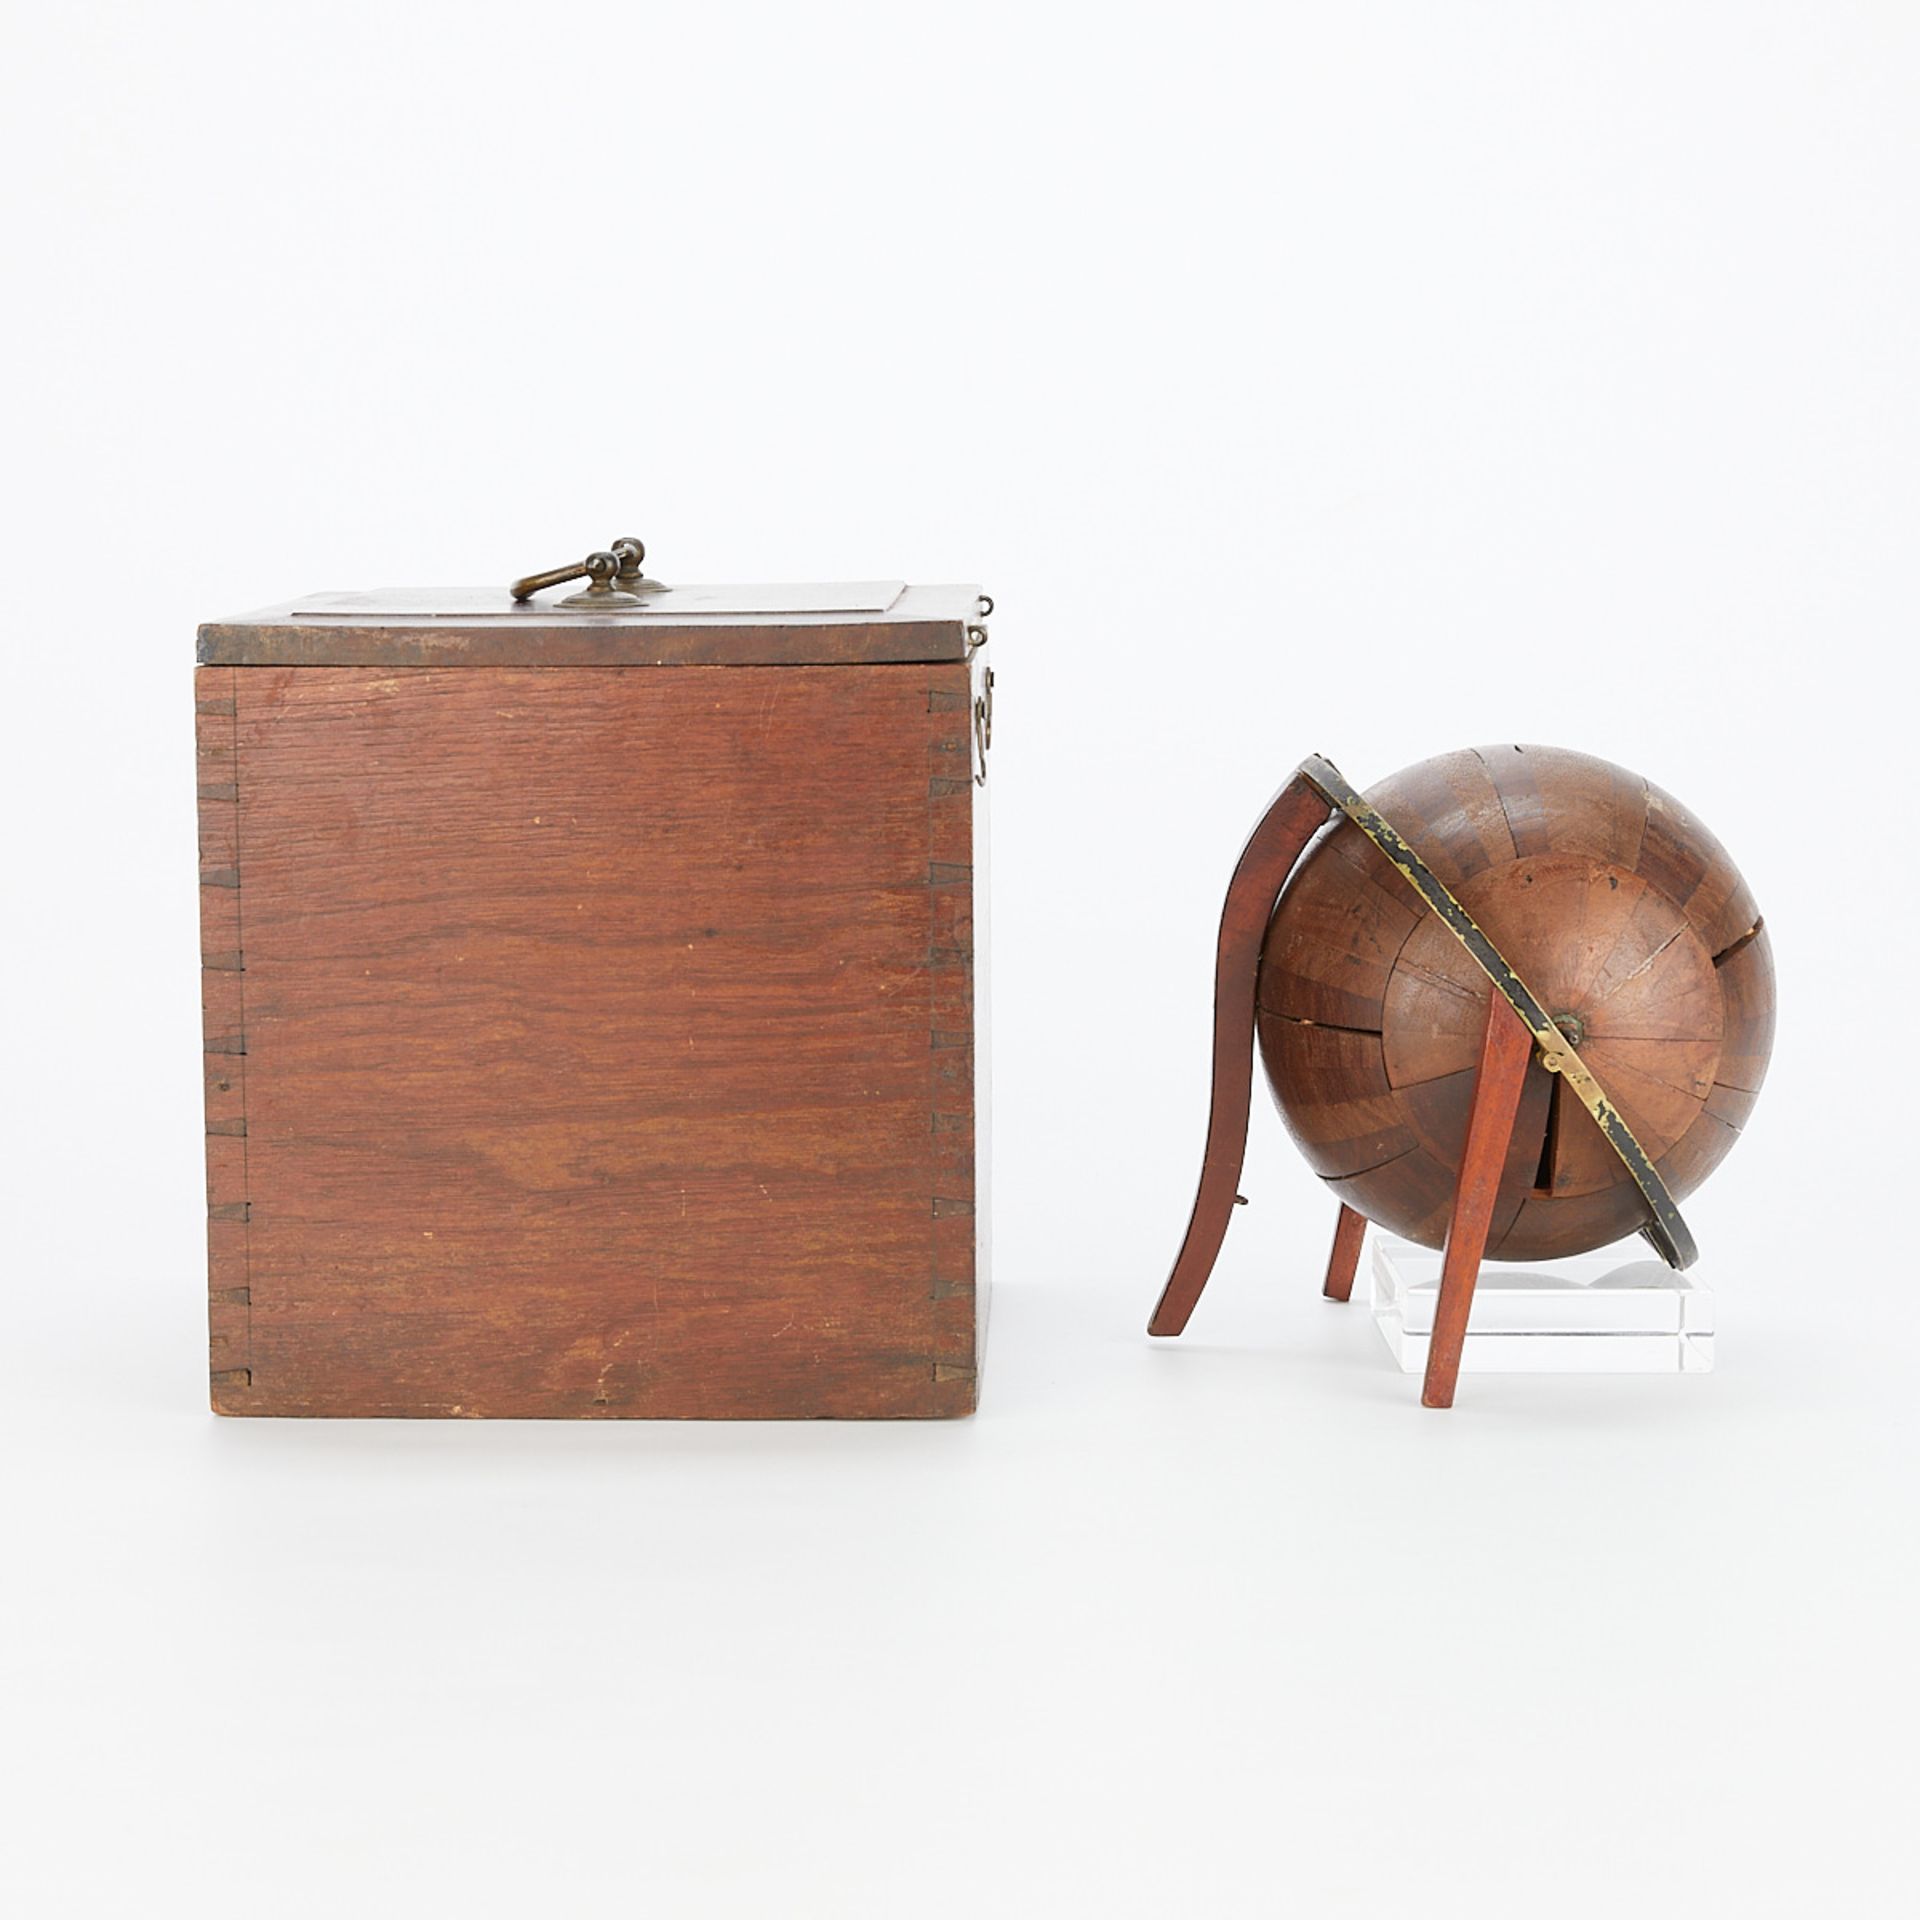 Vintage Wooden Sphere or Globe with Case - Image 6 of 15